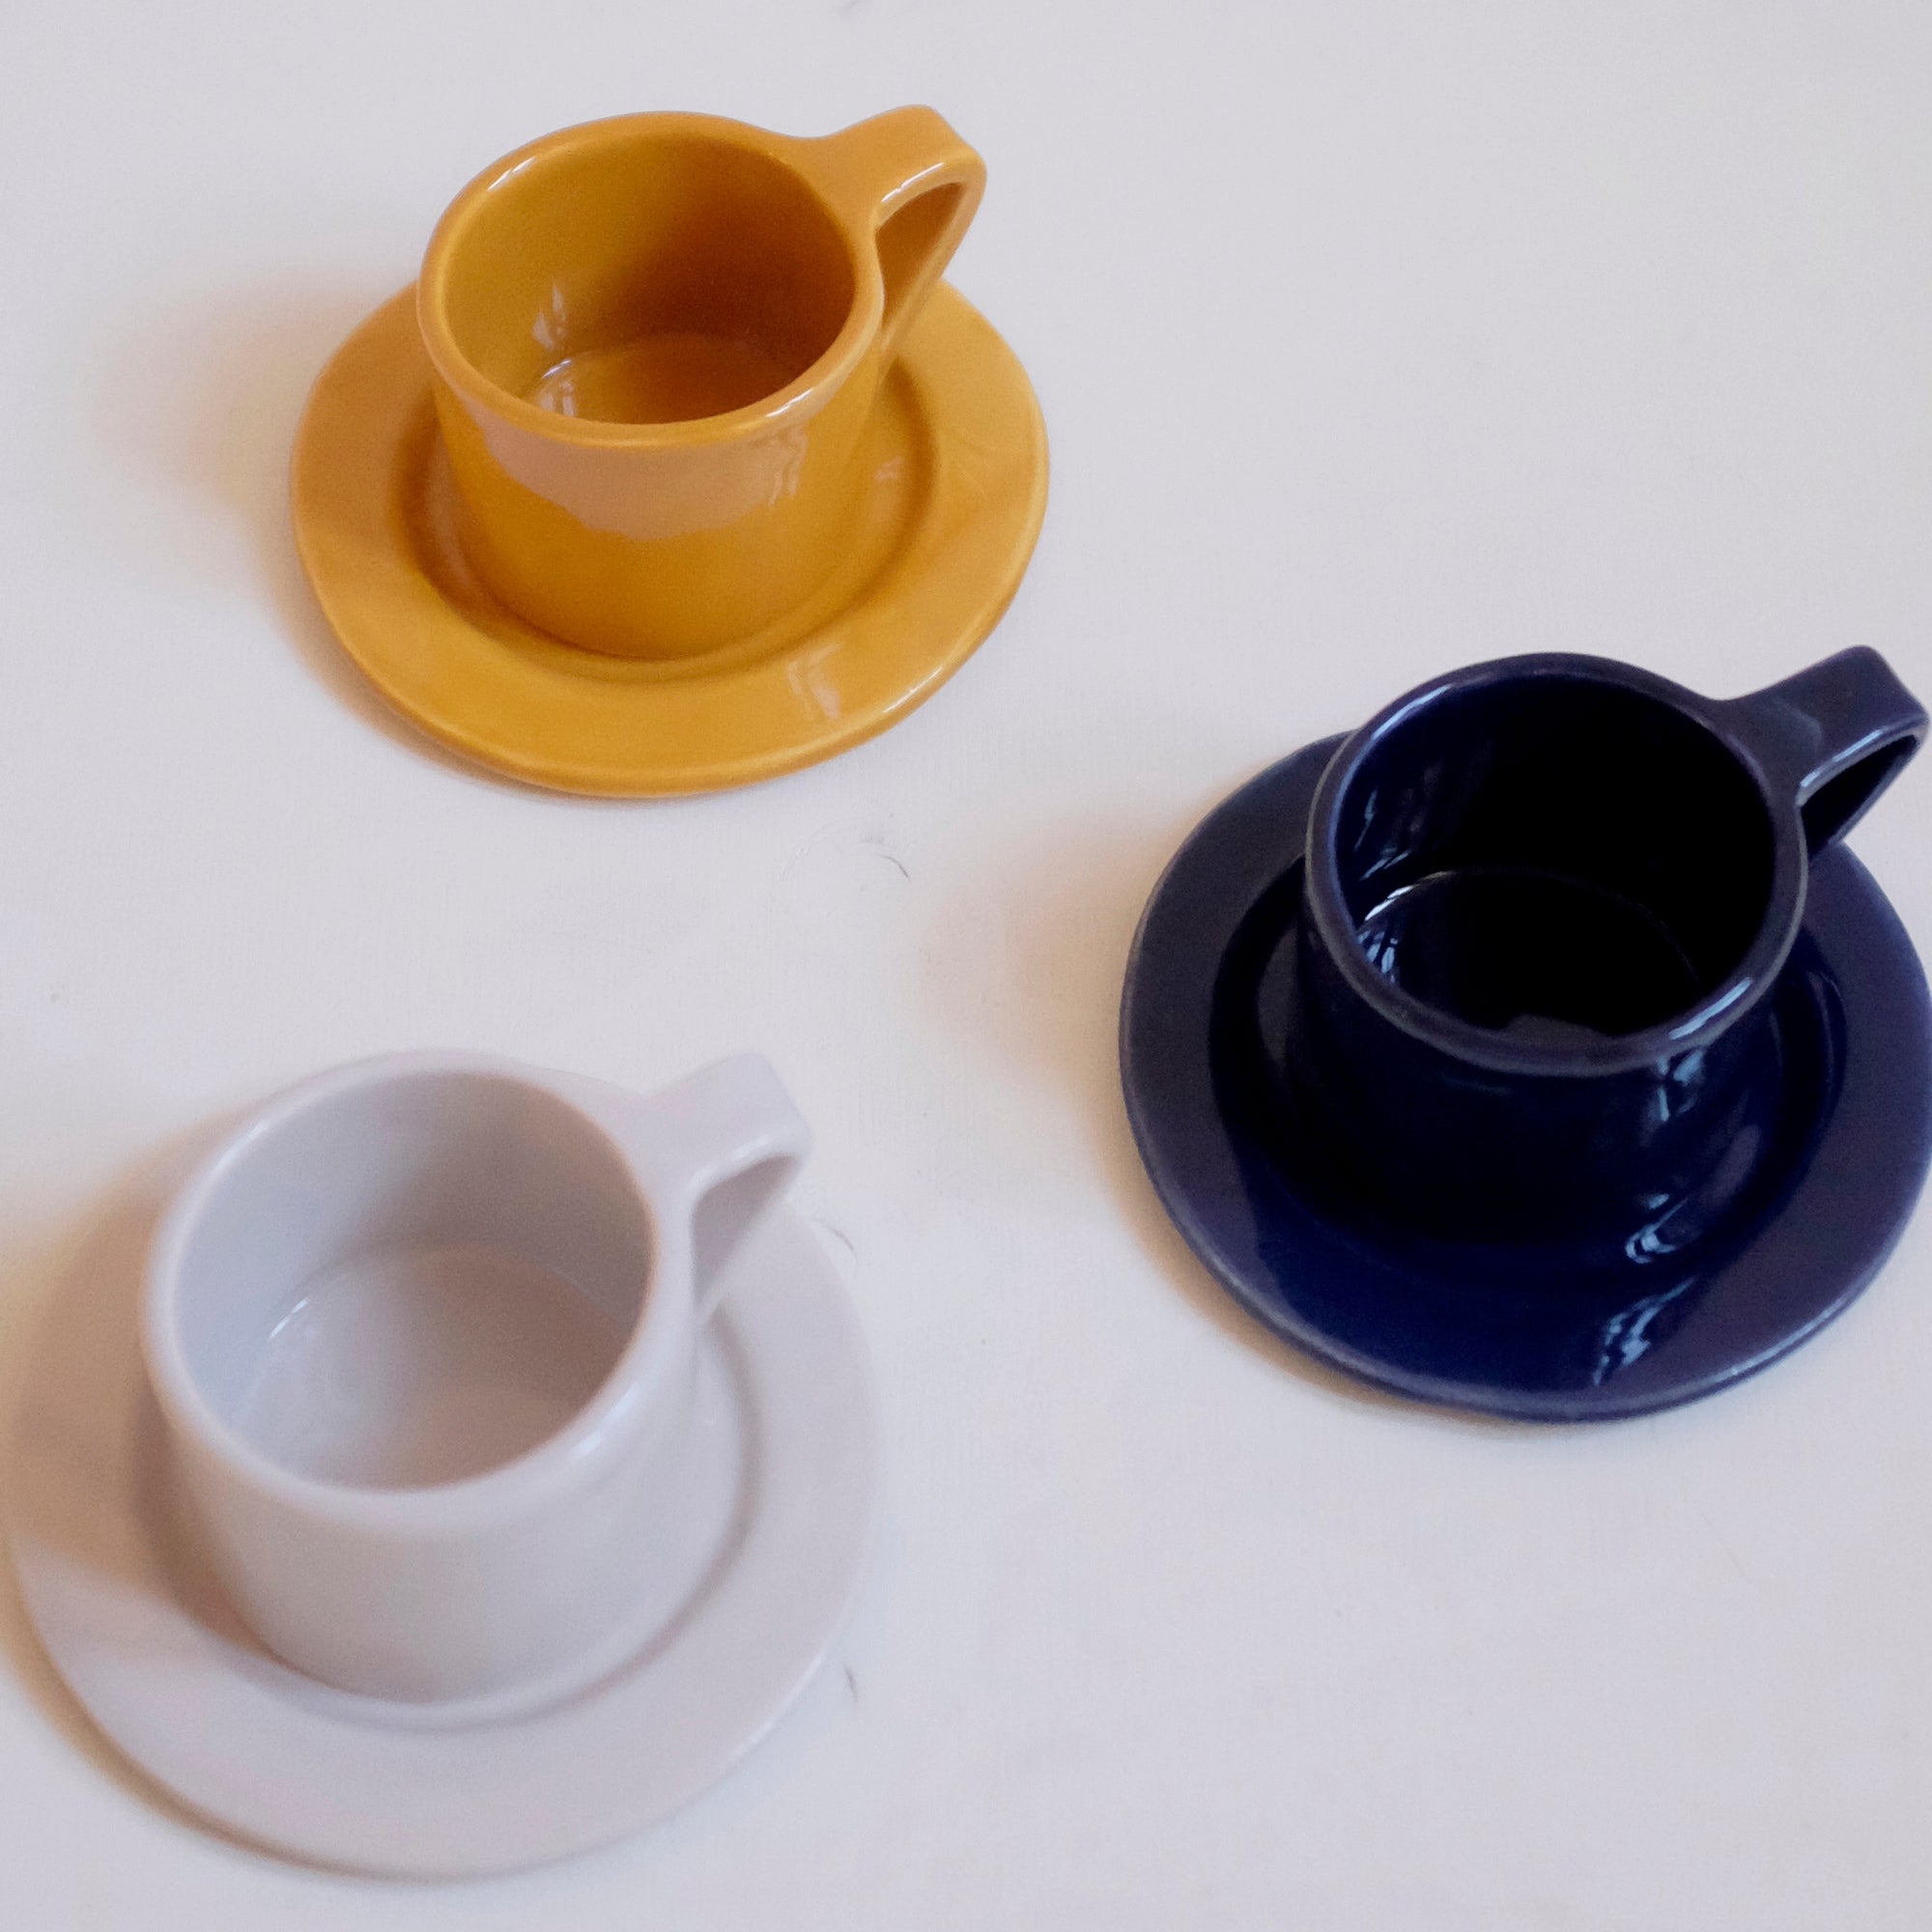 Milano Sole Set of 4 Espresso cups and saucers - Alternative view 2